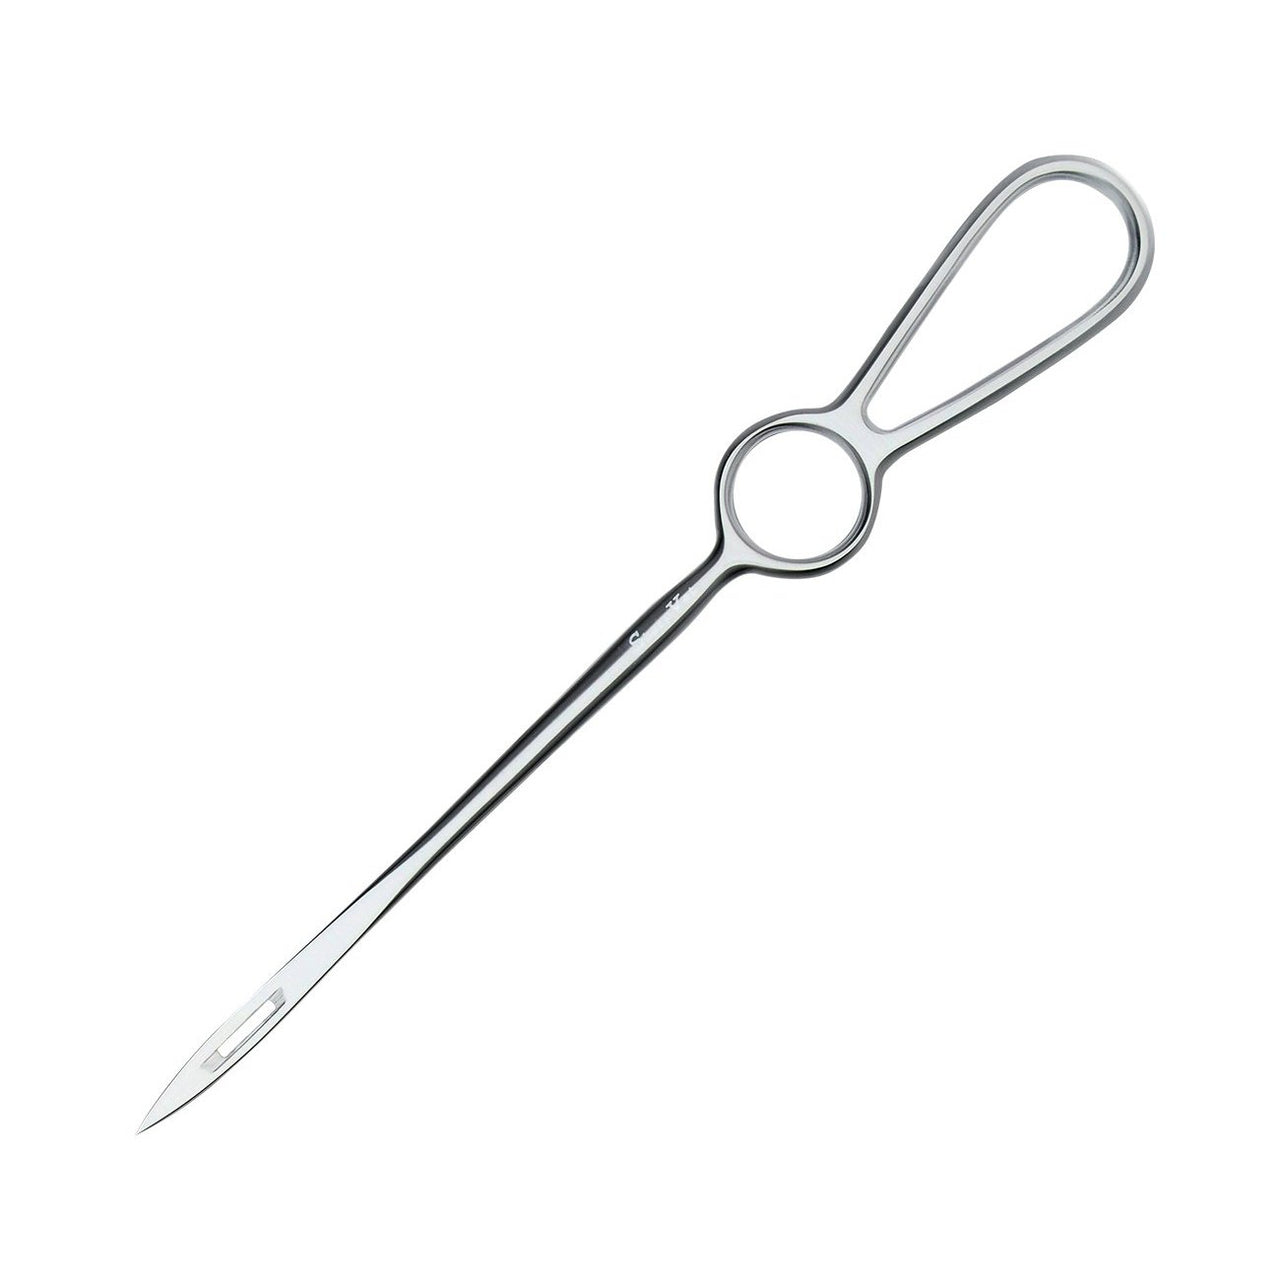 Cattle Boss Buhner Needle 8 Inch - Veterinary Instrumentation Cattle Boss - Canada